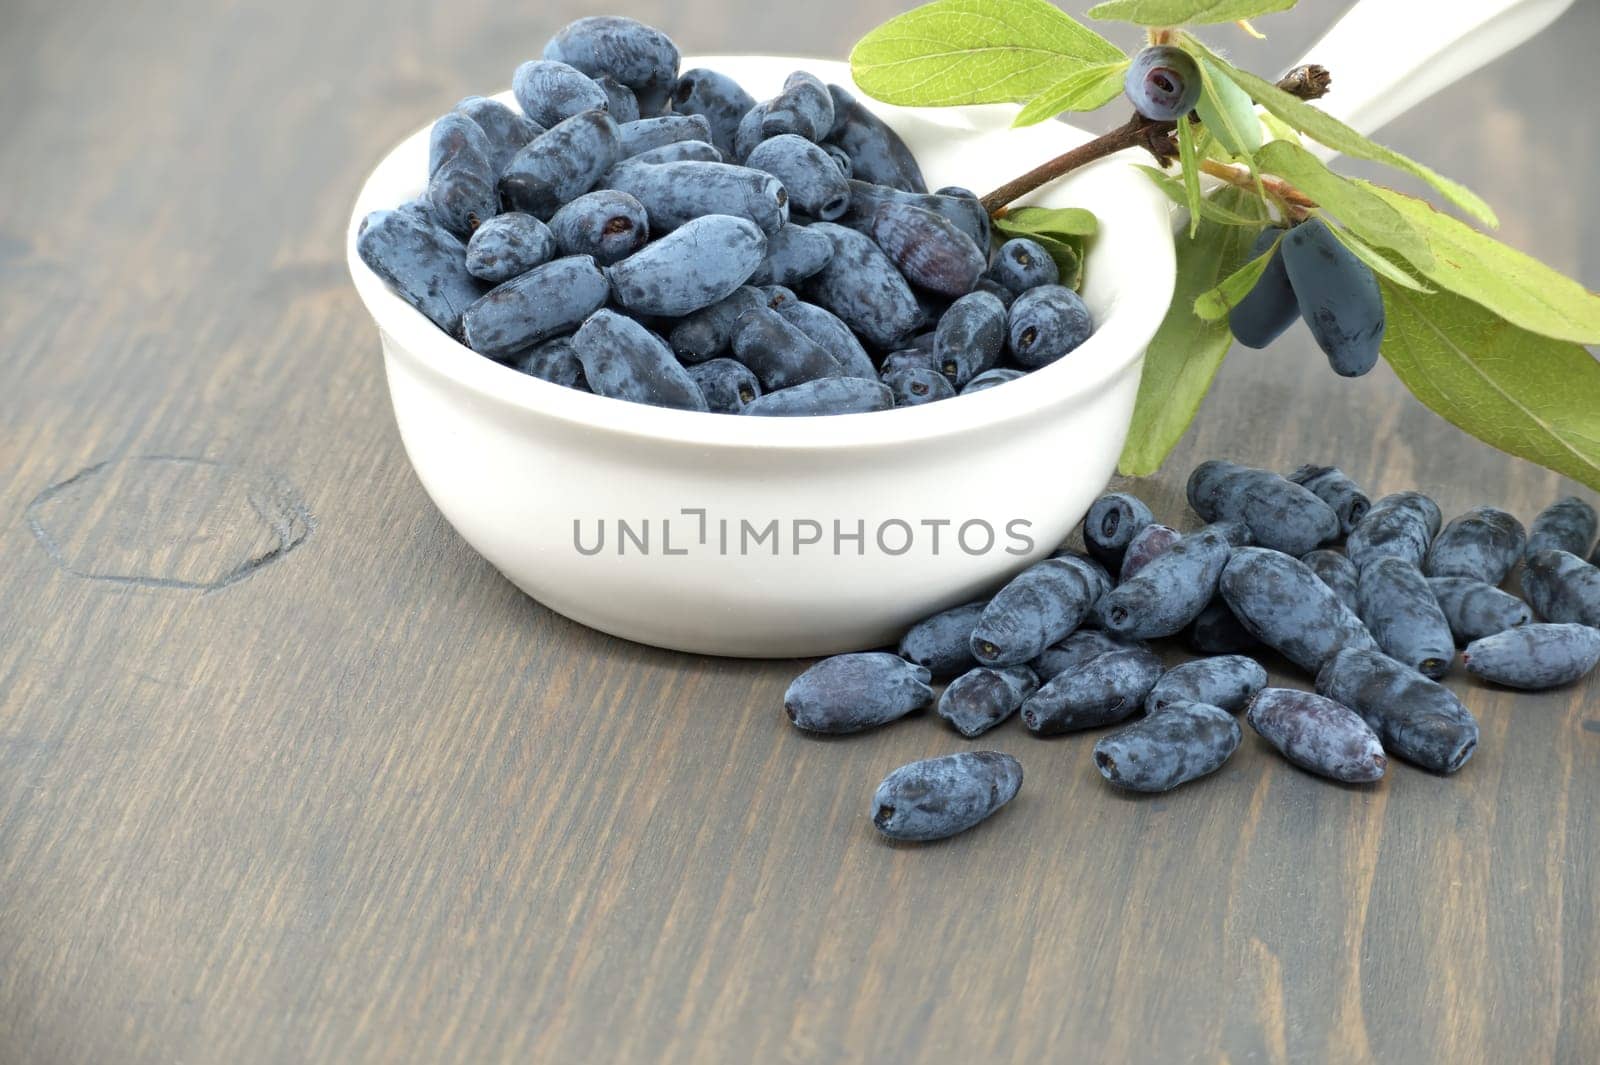 White porcelain bowl filled with blue honeysuckle berries is situated on a wooden table, some of berries spilling out onto the table near branch with fresh green leaves and berries